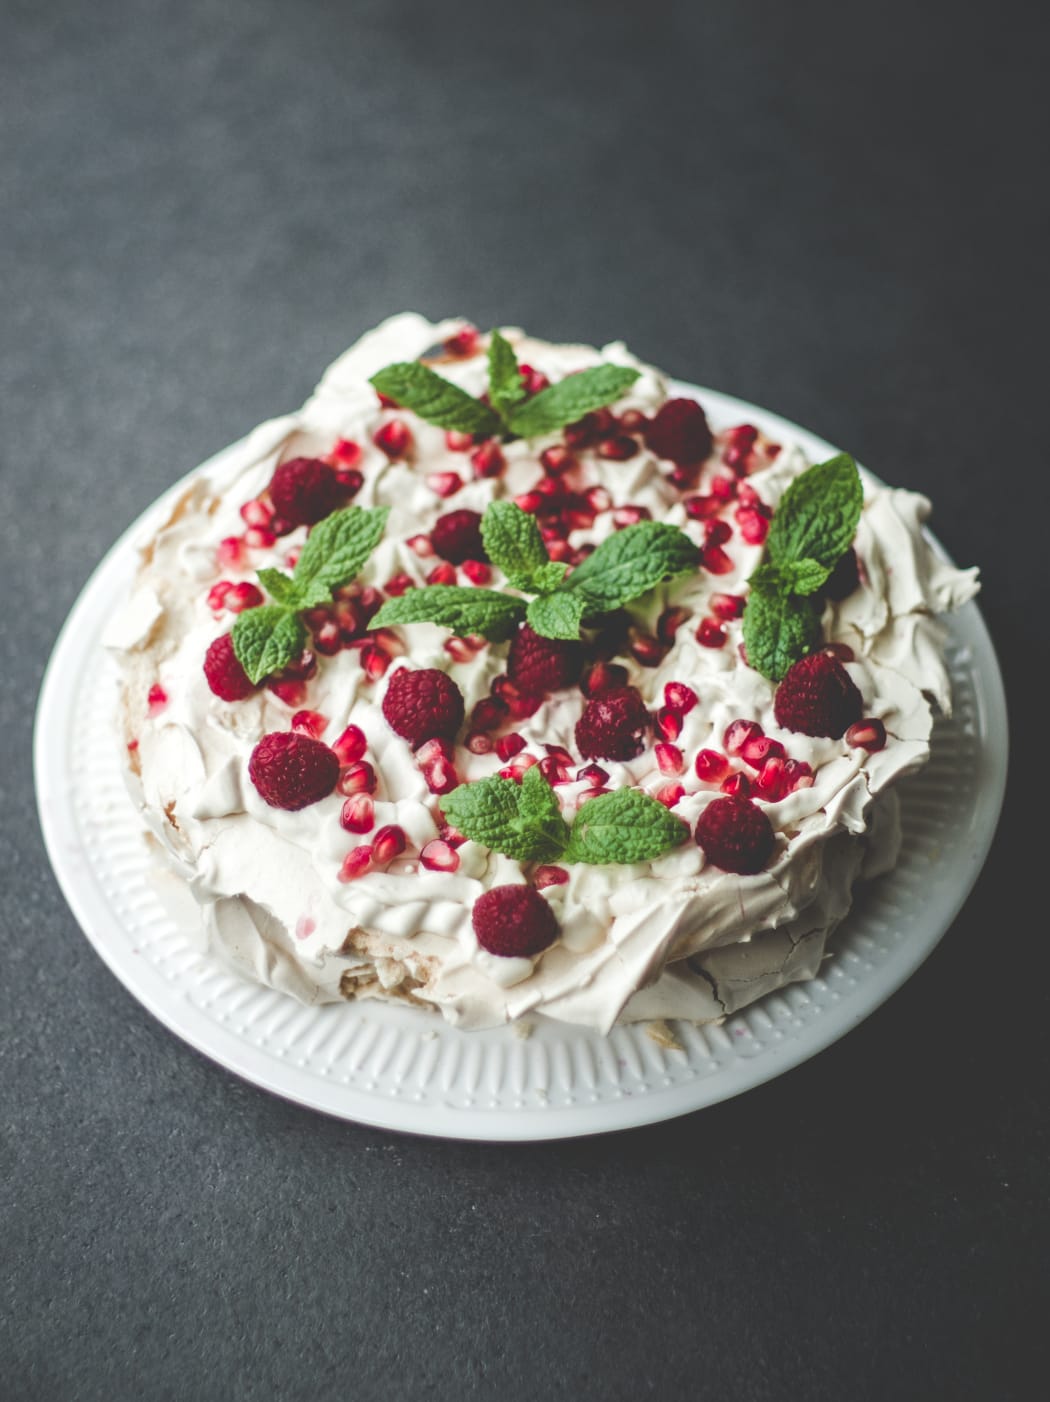 A pavlova with berries and mint.